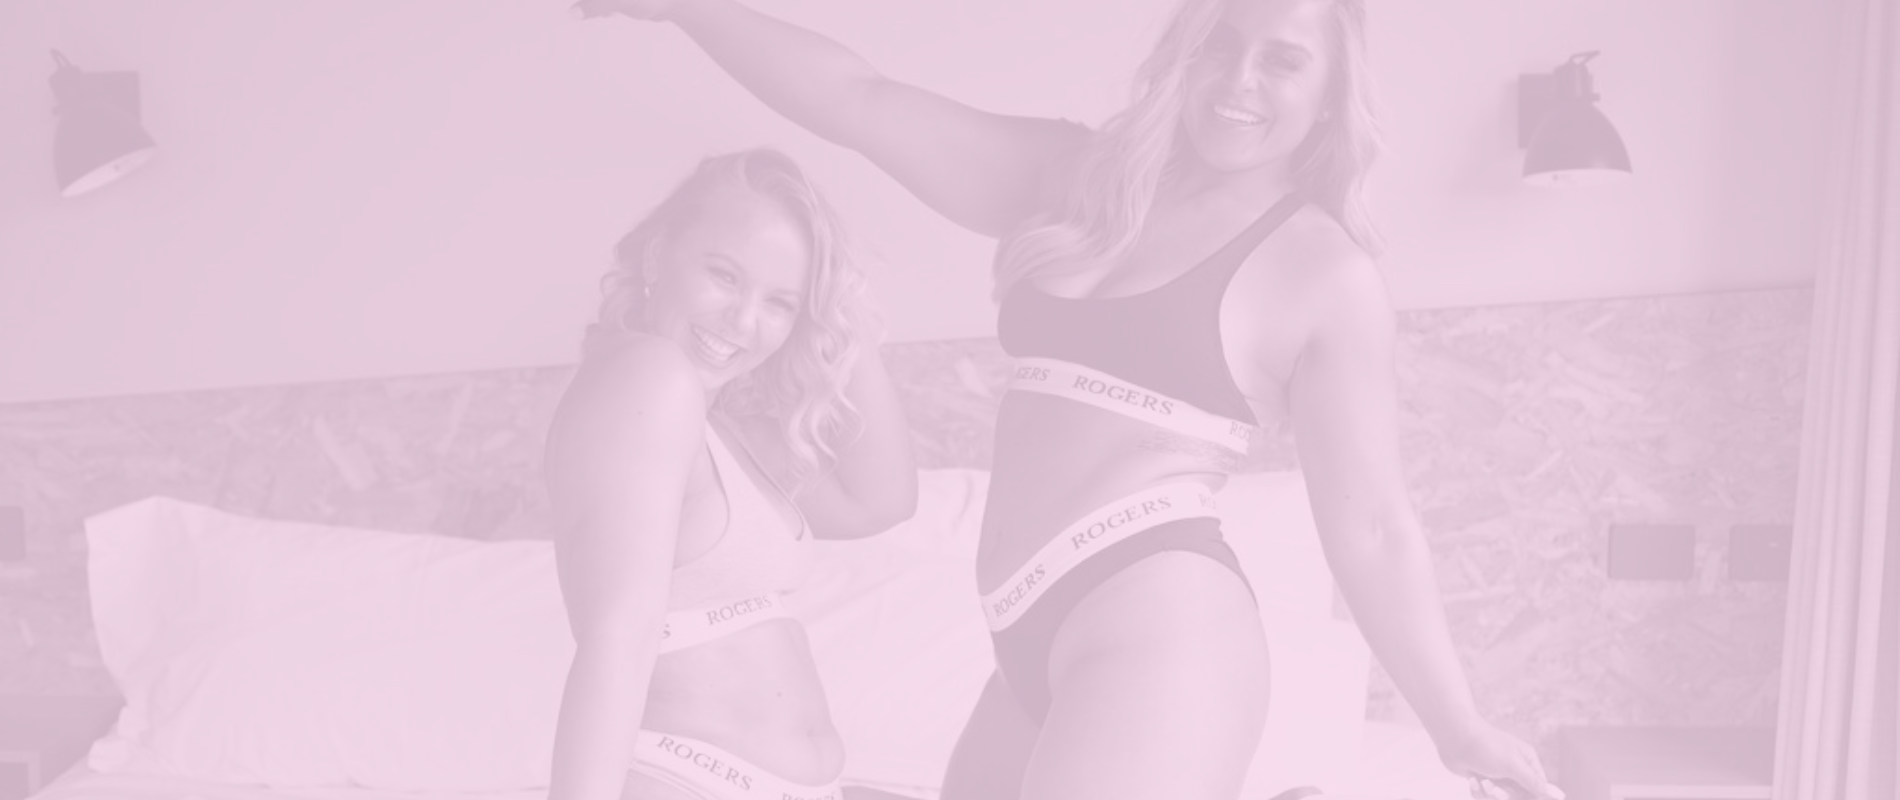 Two women on a bed in their underwear smiling and dancing, embracing their bodies